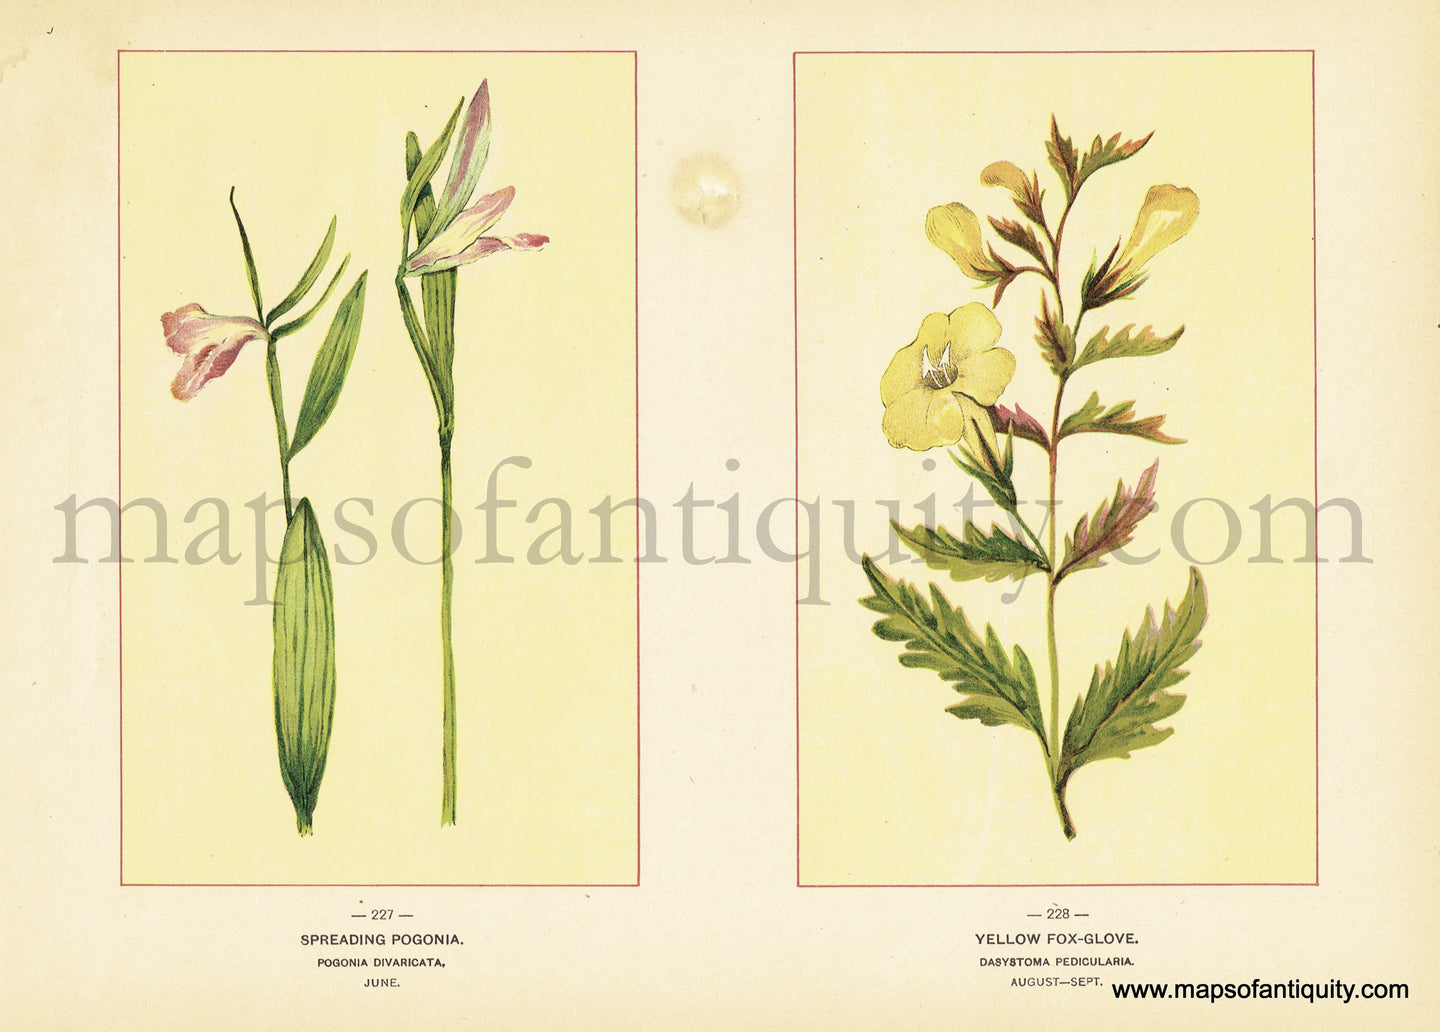 Antique-Chromolithograph-Print-Spreading-Pogonia-&-Yellow-Fox-Glove-Antique-Prints-Natural-History-Botanical-1894--Maps-Of-Antiquity